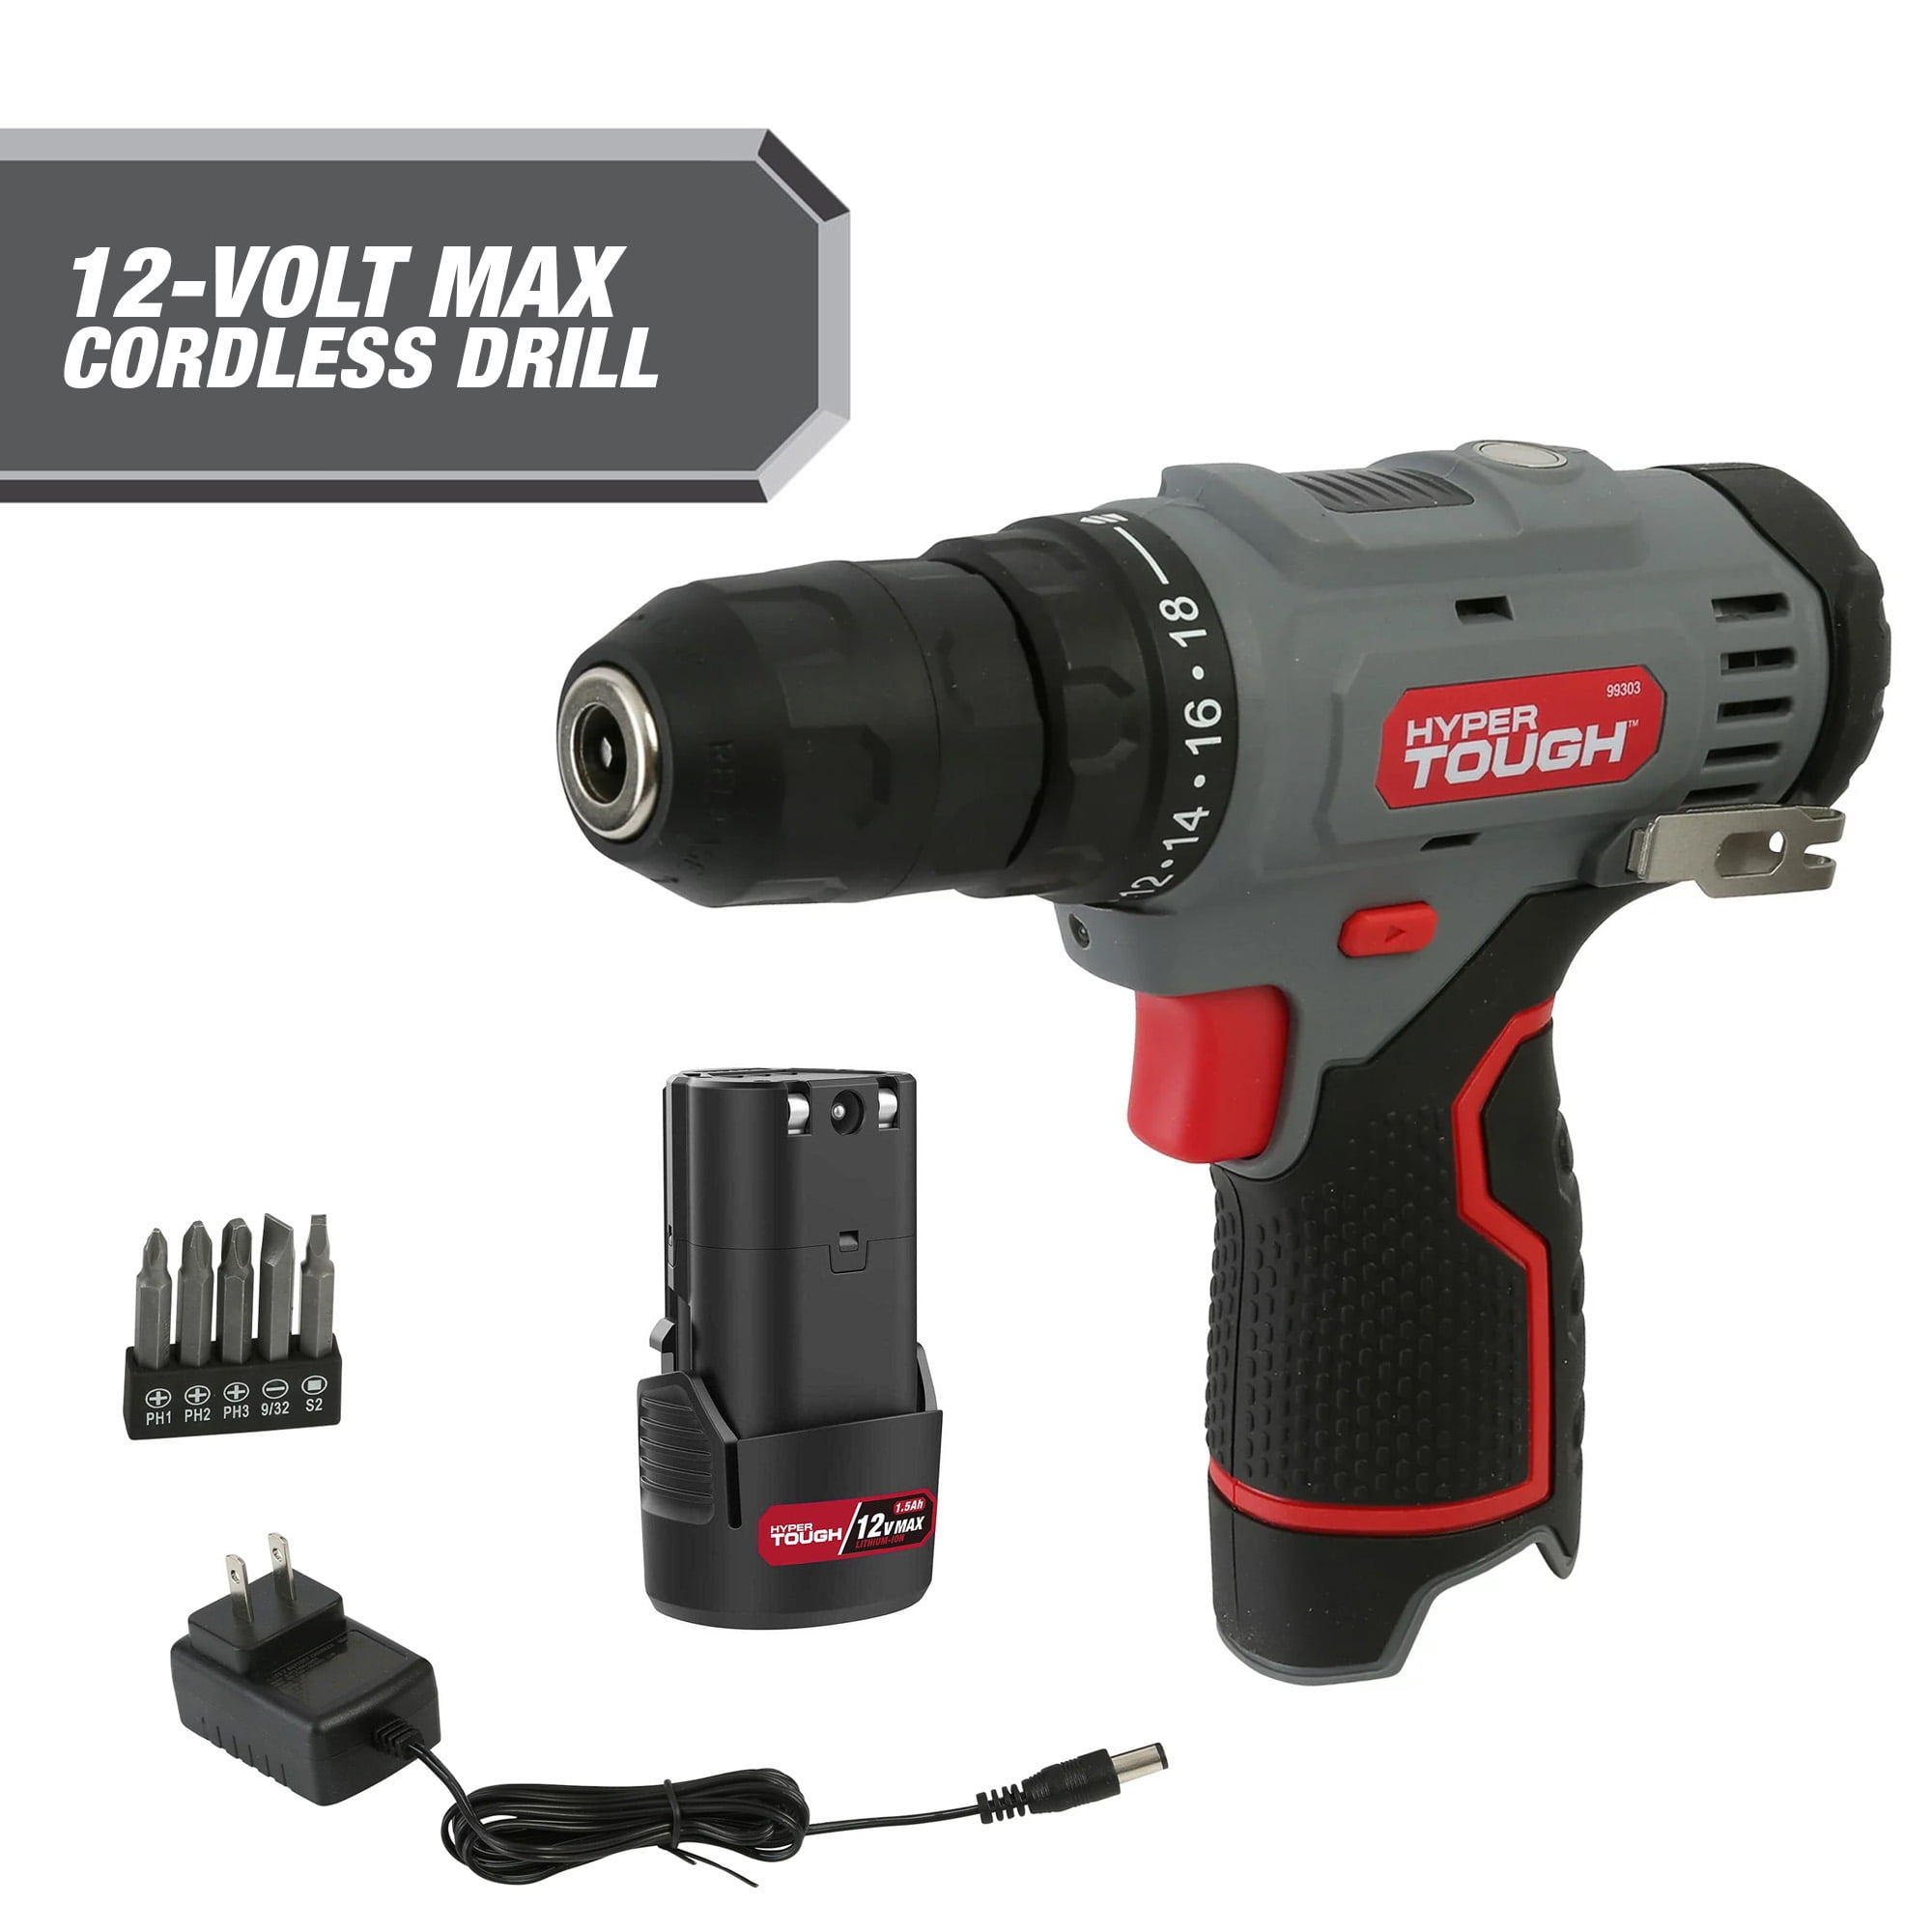 12V Max Lithium-Ion Cordless Brushless 2-Speed 3/8-inch Drill Driver - Bed  Bath & Beyond - 37497131